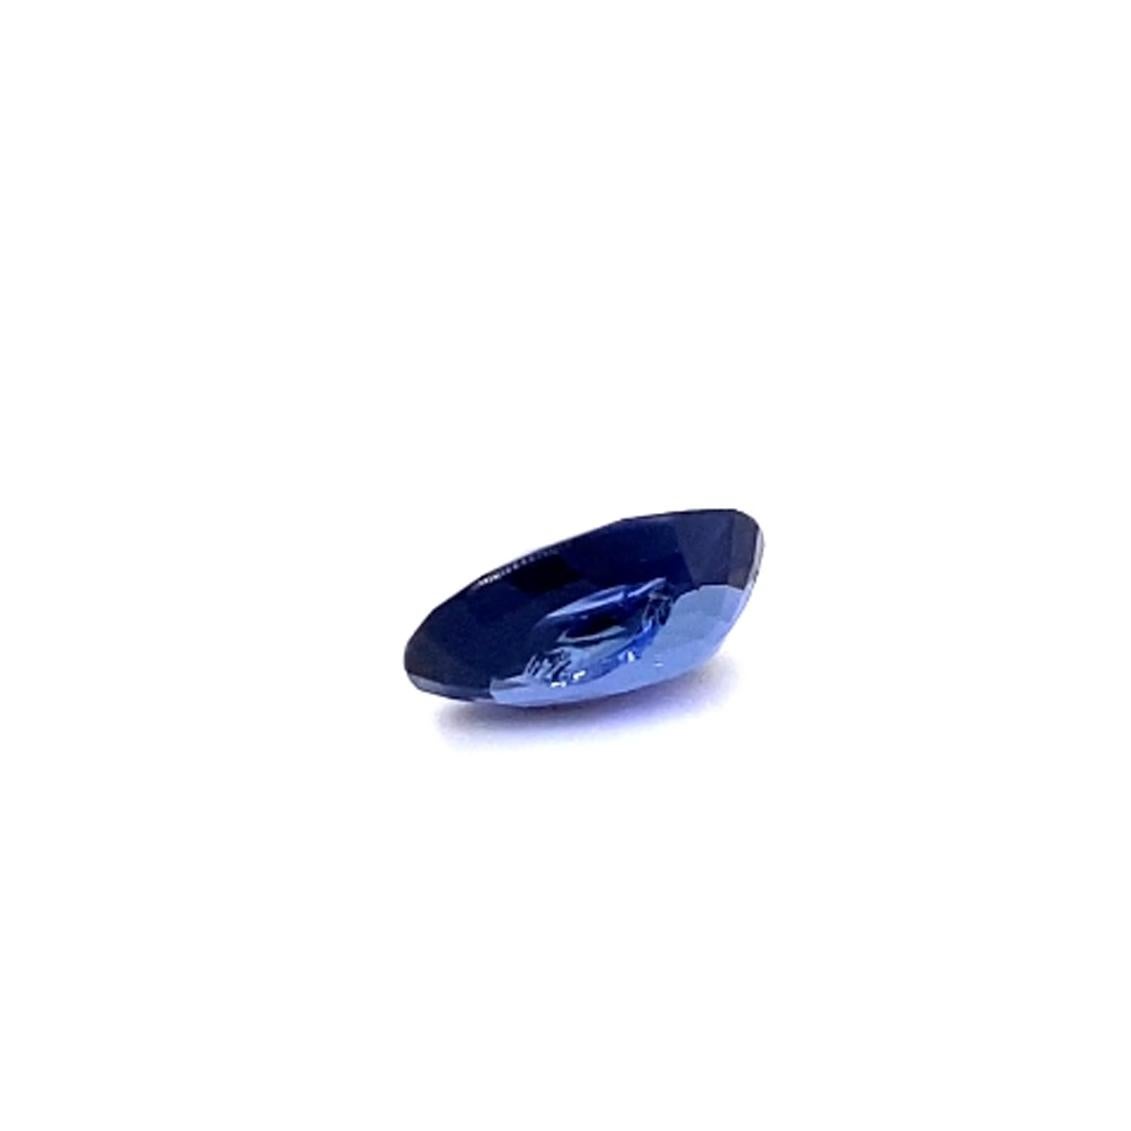 Carat: 4.34 
Item: Blue Sapphire 
Type: Natural 
Shape: Oval 
Origin: - 
Color: Blue
Size: 12.78x8.24x4.55
Certificate: BELL R-202245745

Introducing the epitome of elegance: our Bellerophon certified Blue Sapphire, a natural wonder of unrivaled